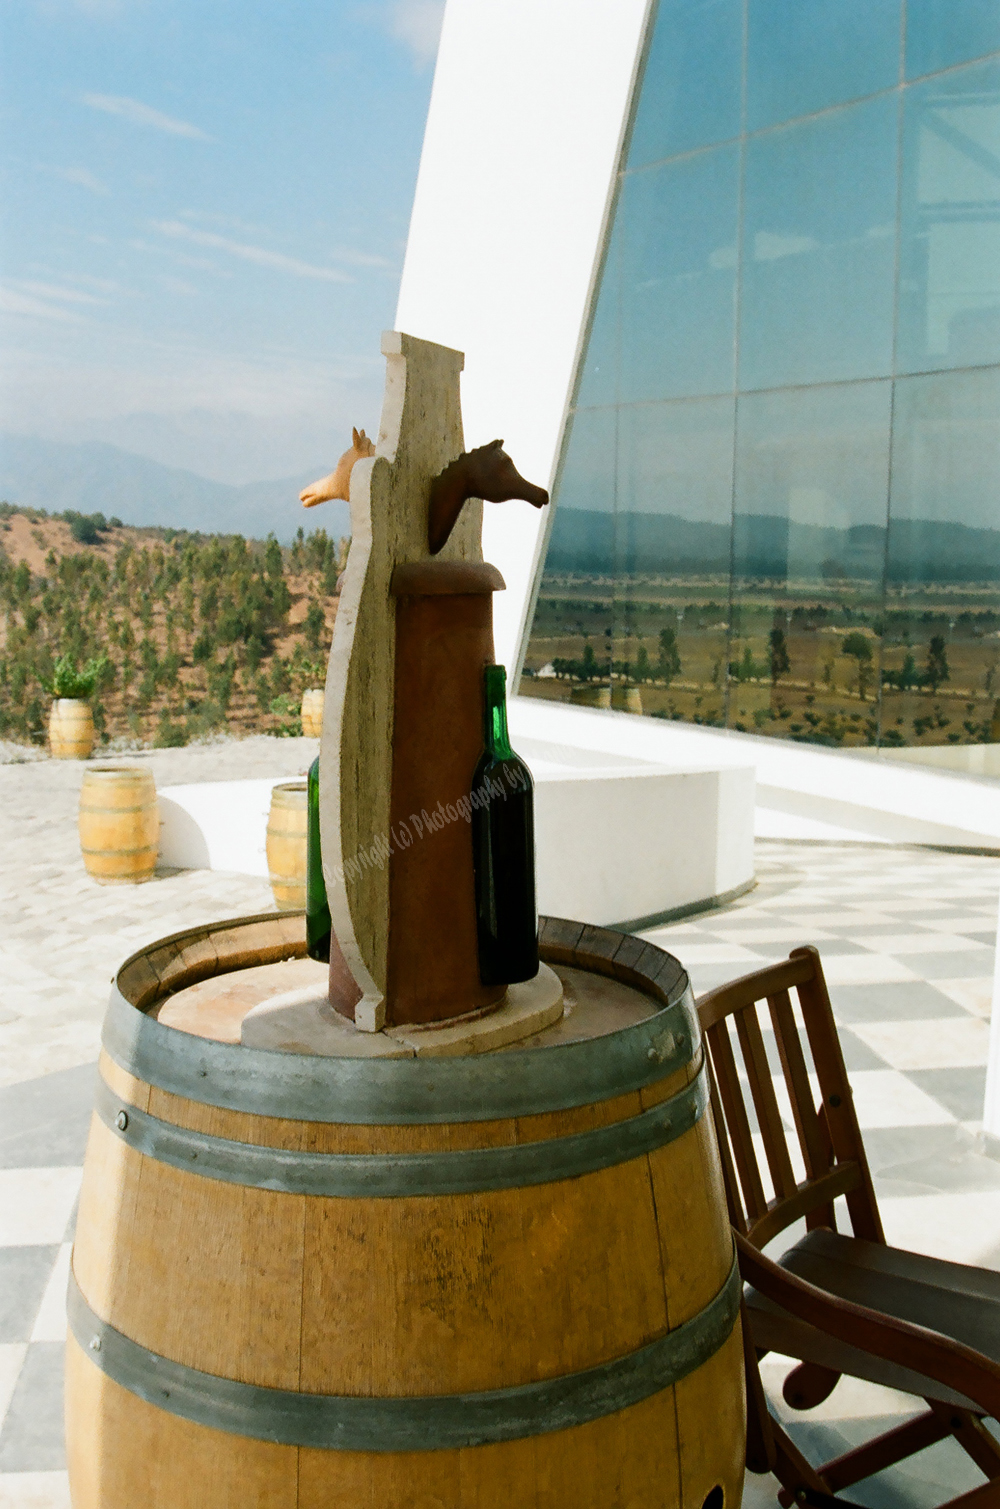 Winery in Chile